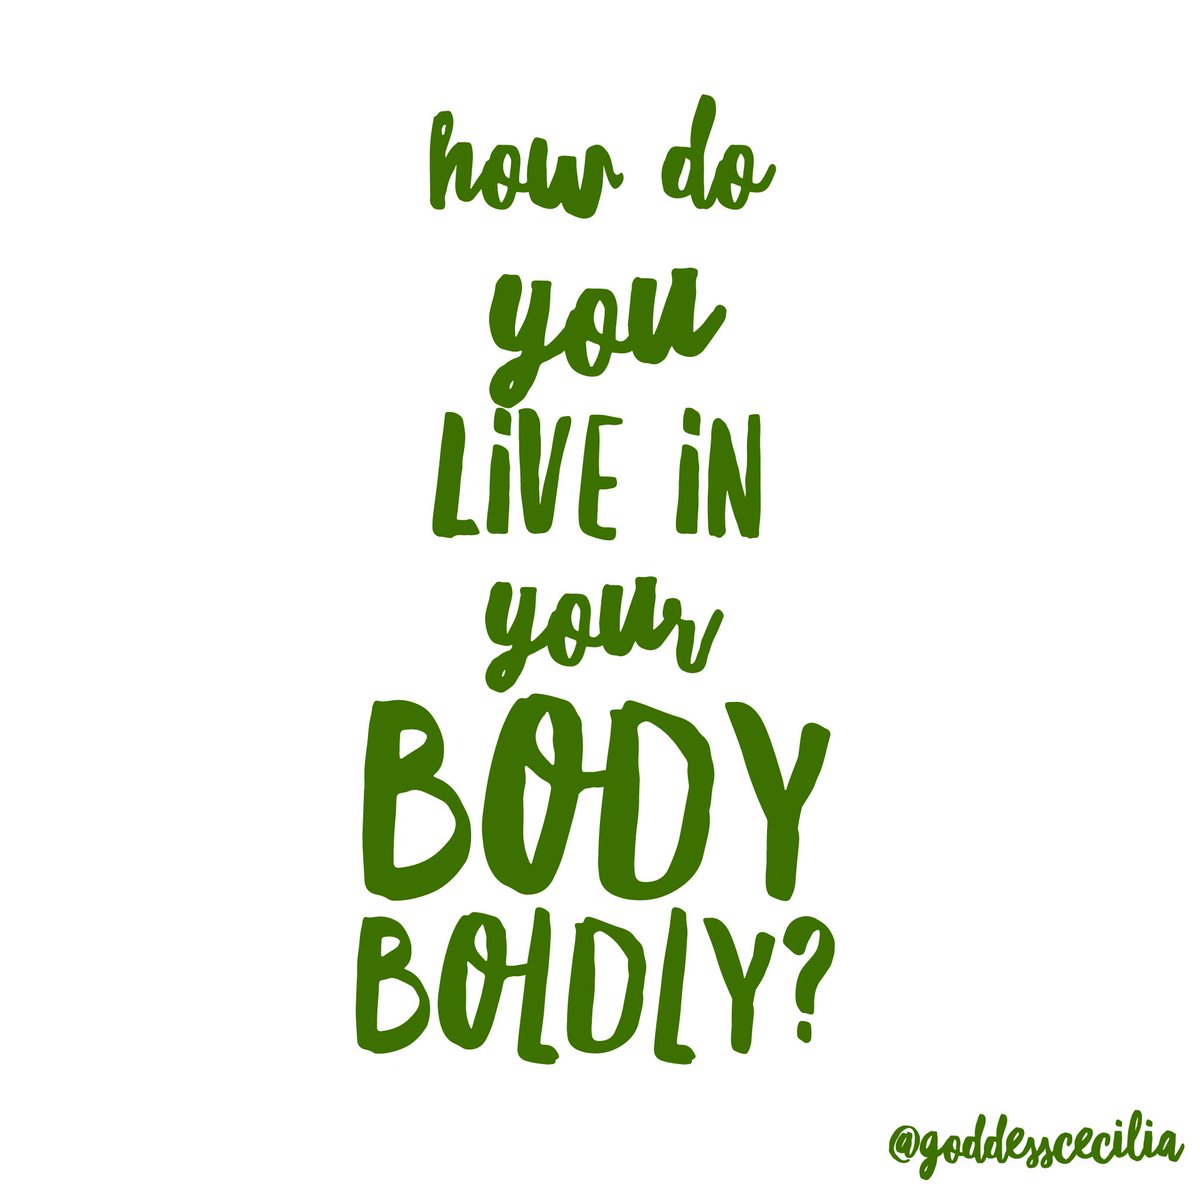 In these final hours of #BodyAwarenessMonth, how are you and how will you be intentional about living in your #BodyBoldly?